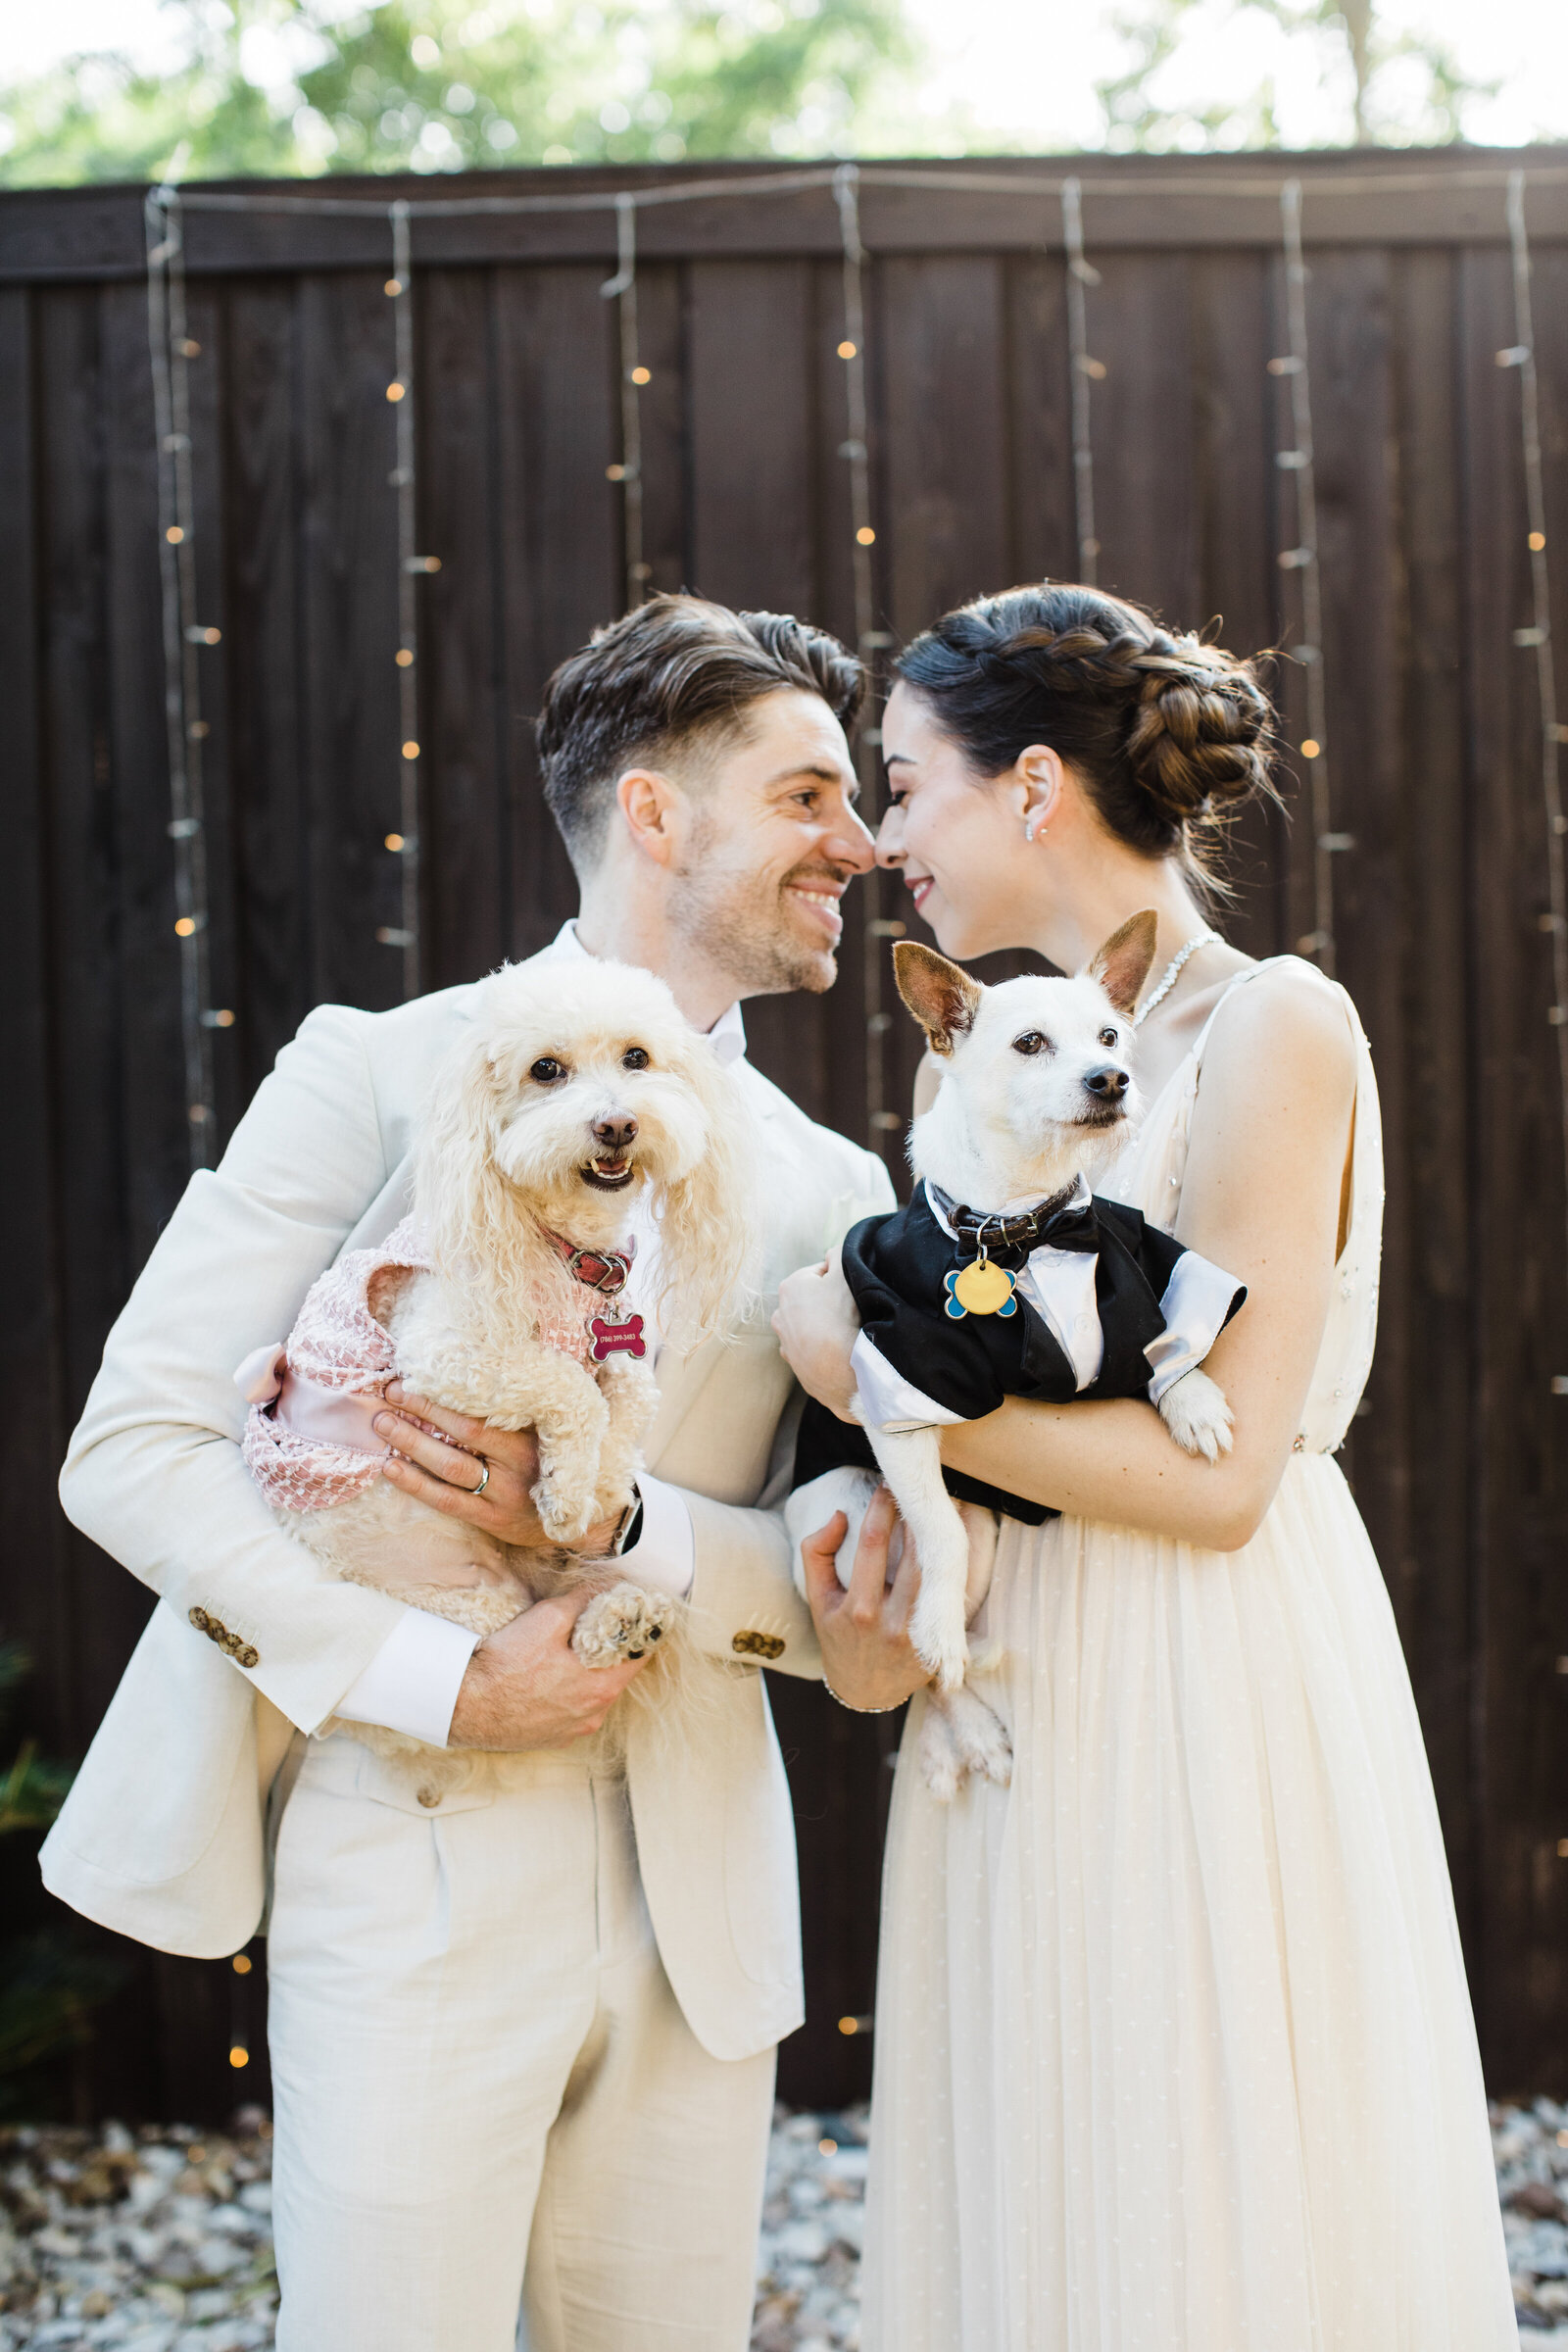 A bride and groom and their two dogs posing together in front of a fence covered in lights. The bride is on the right and is wearing a sleeveless white dress. The little white dog she's holding is wearing a small black tuxedo. The groom is on the left and is wearing a cream colored suit. The small white dog he's holdign is wearing a light pink dress.